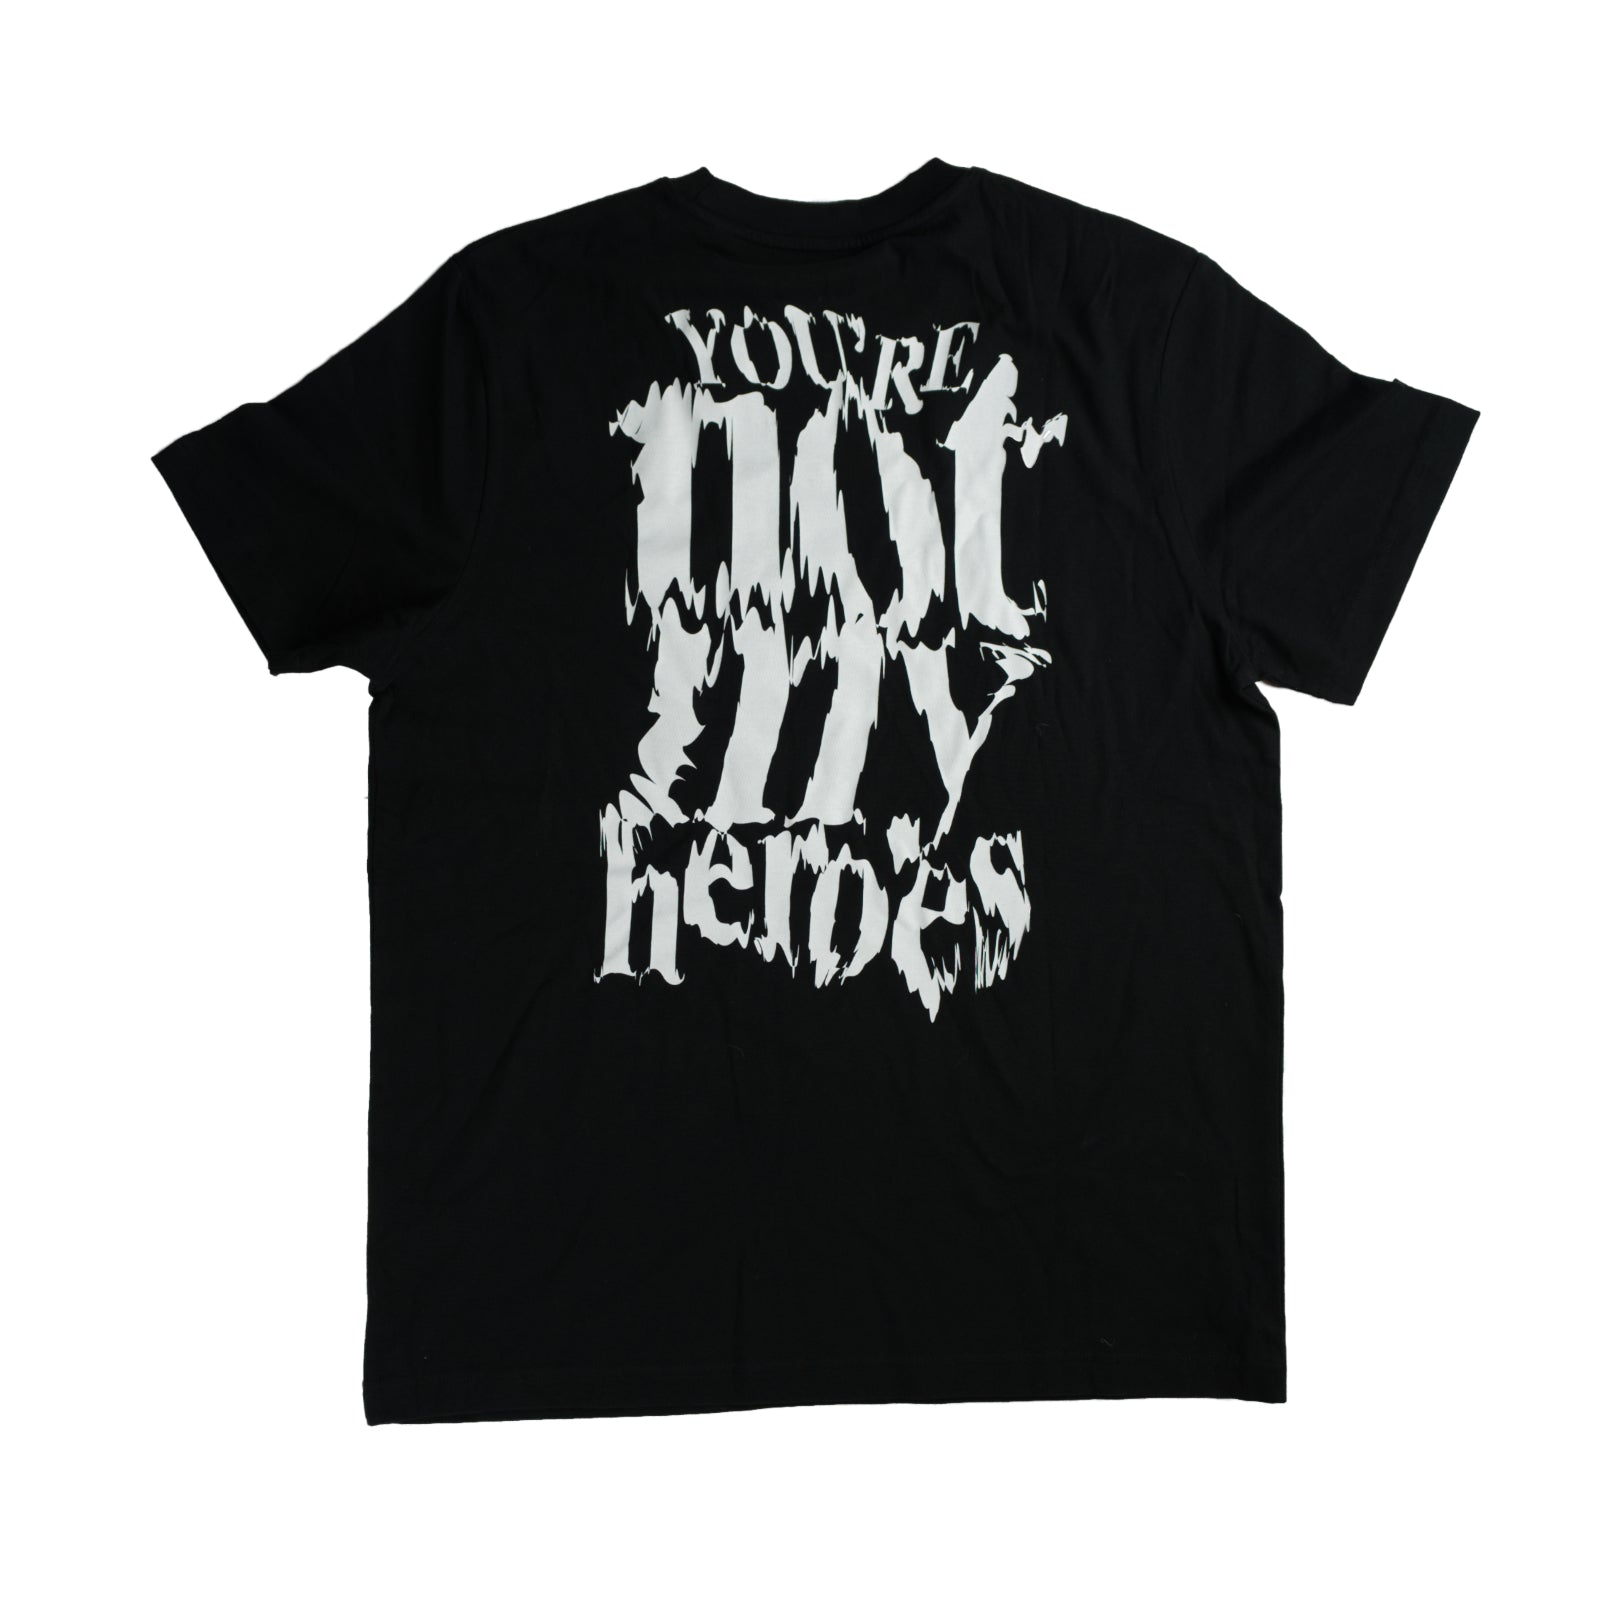 "You're not my heroes!" - T-Shirt - Black